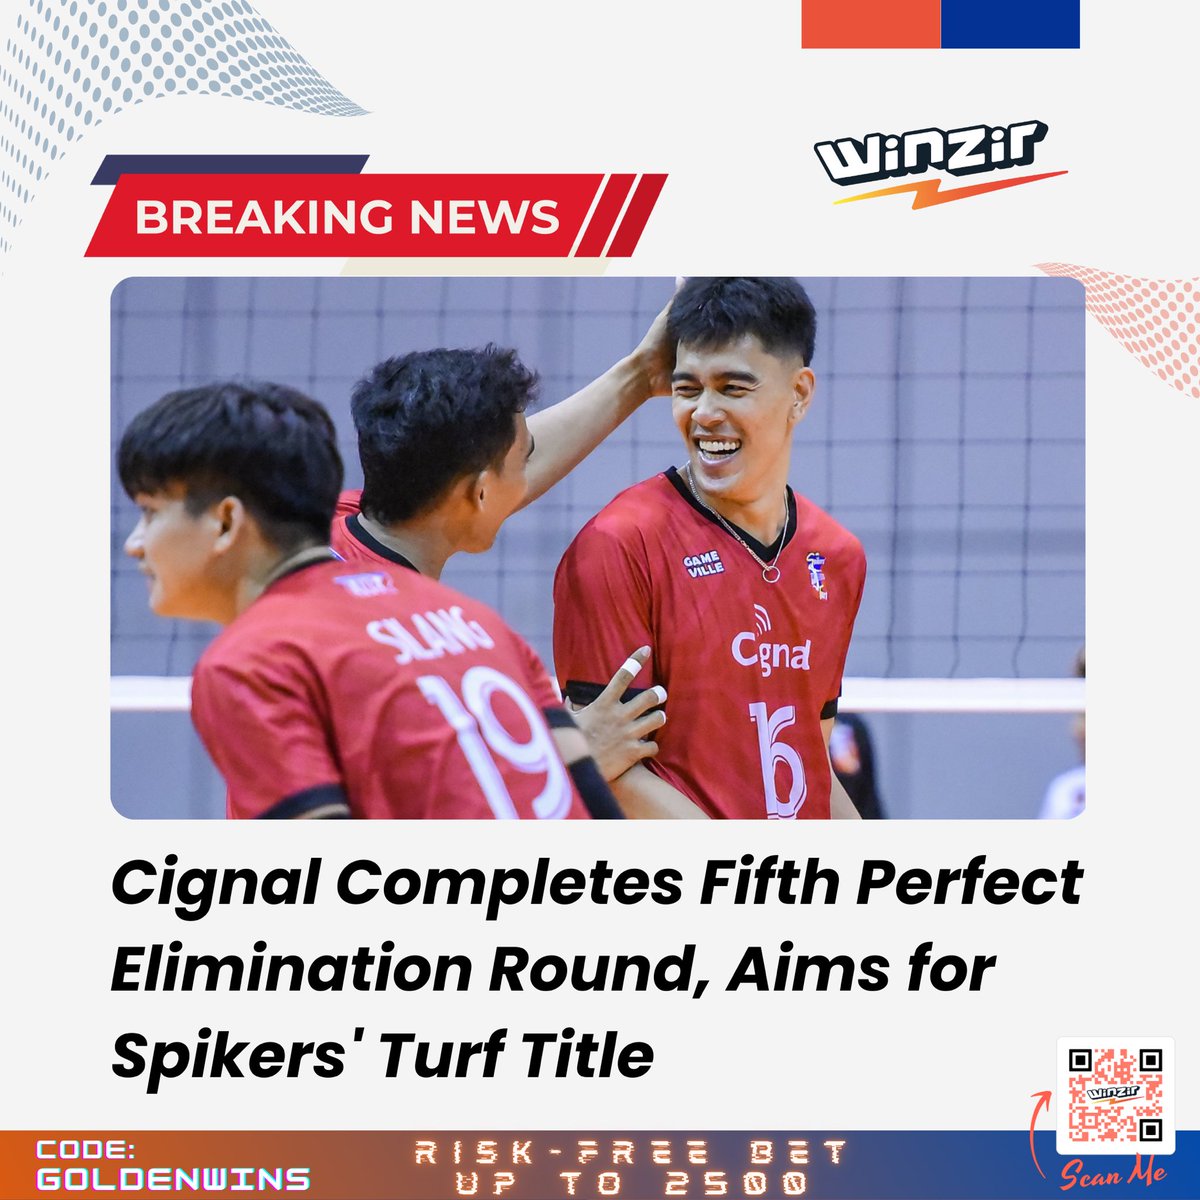 History repeats itself! 🔁❤️‍🔥

Cignal HD Spikers achieve a PERFECT 8-0 record in the Spikers' Turf elimination round for the FIFTH time! 🤯👑

Register in WinZir here: winzir.ph/affiliates/?bt… ⚡️

#winzir #sportsbetting #volleyball #SpikersTurf #winfromwithin #keepitfun